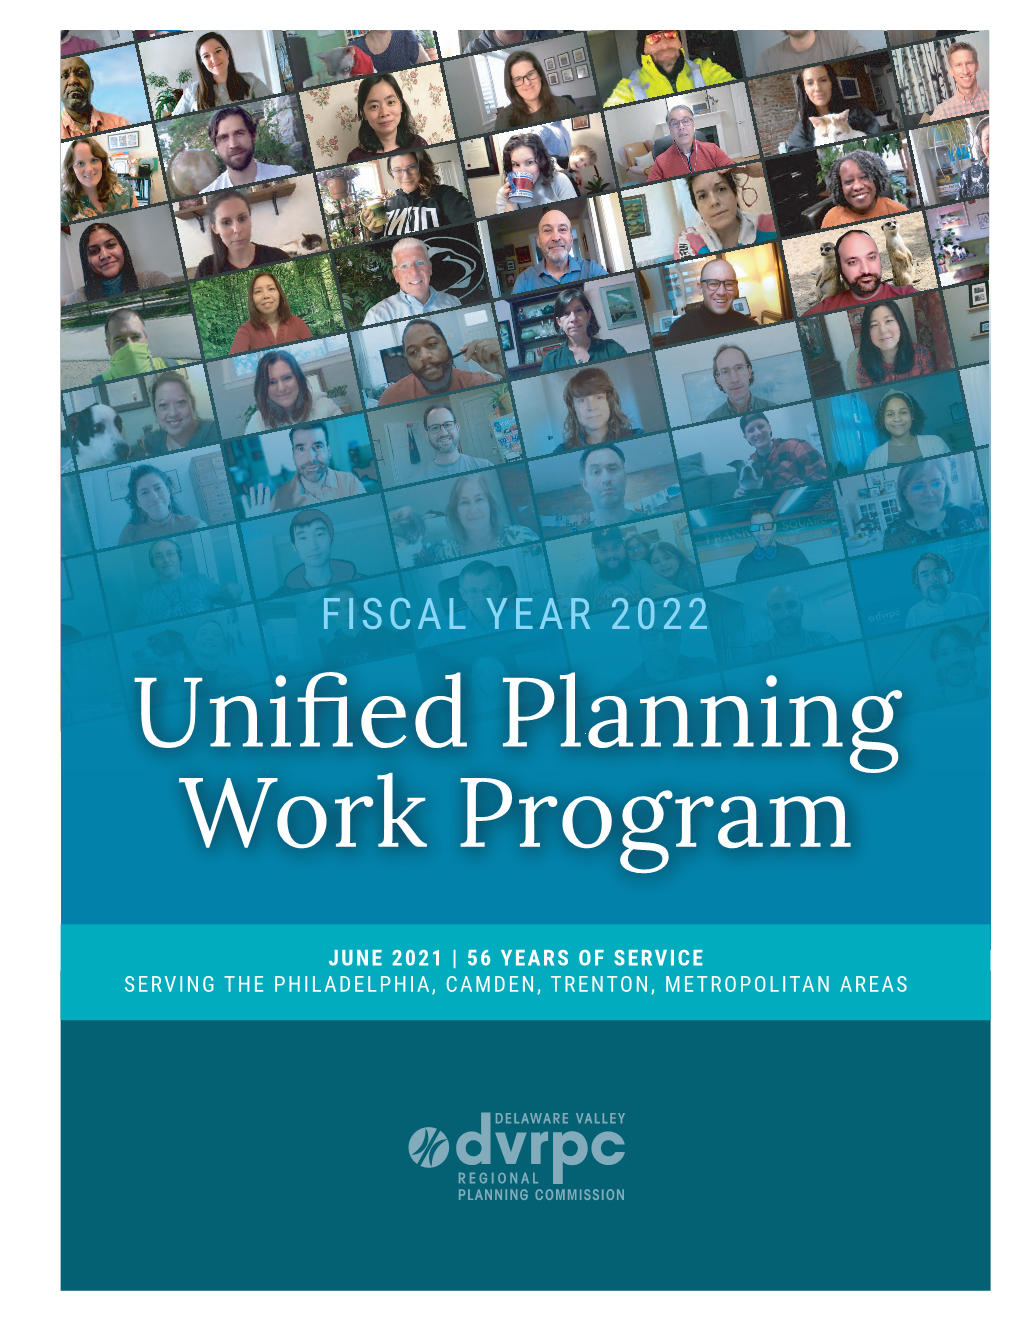 Fiscal Year 2022 Unified Planning Work Program (UPWP) As Adopted by the DVRPC Board on January 28, 2021